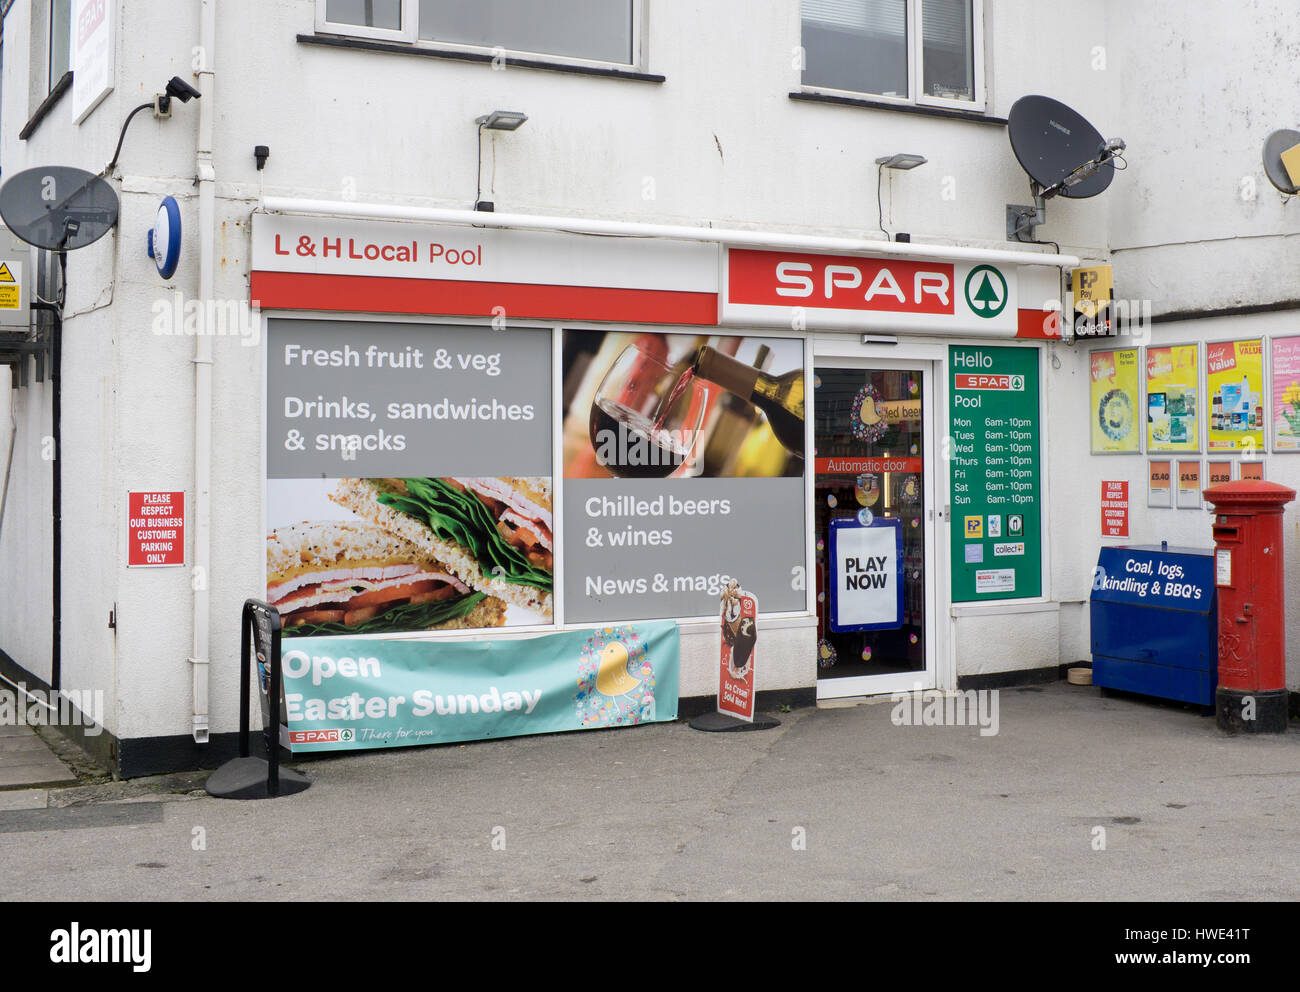 SPAR L & H Local shop in Pool, Cornwall England UK. Stock Photo